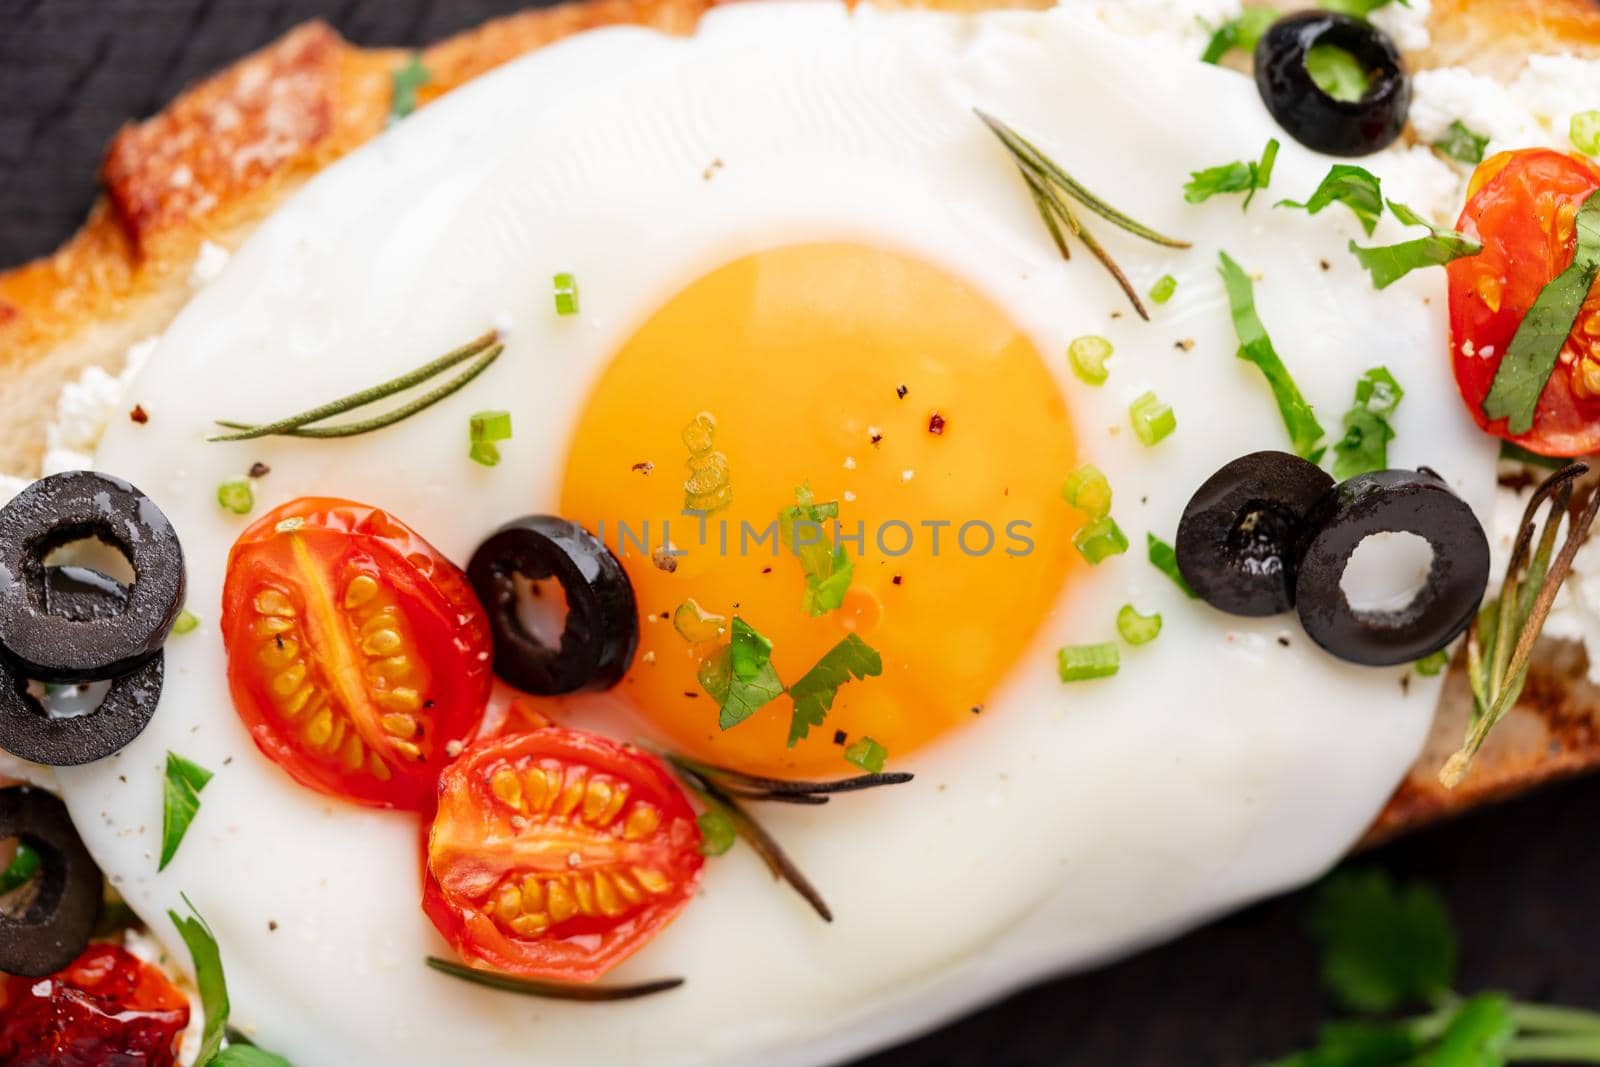 Toasted bread toast with fried eggs with yellow yolk and tomatoes, top view, macro, close up by NataBene